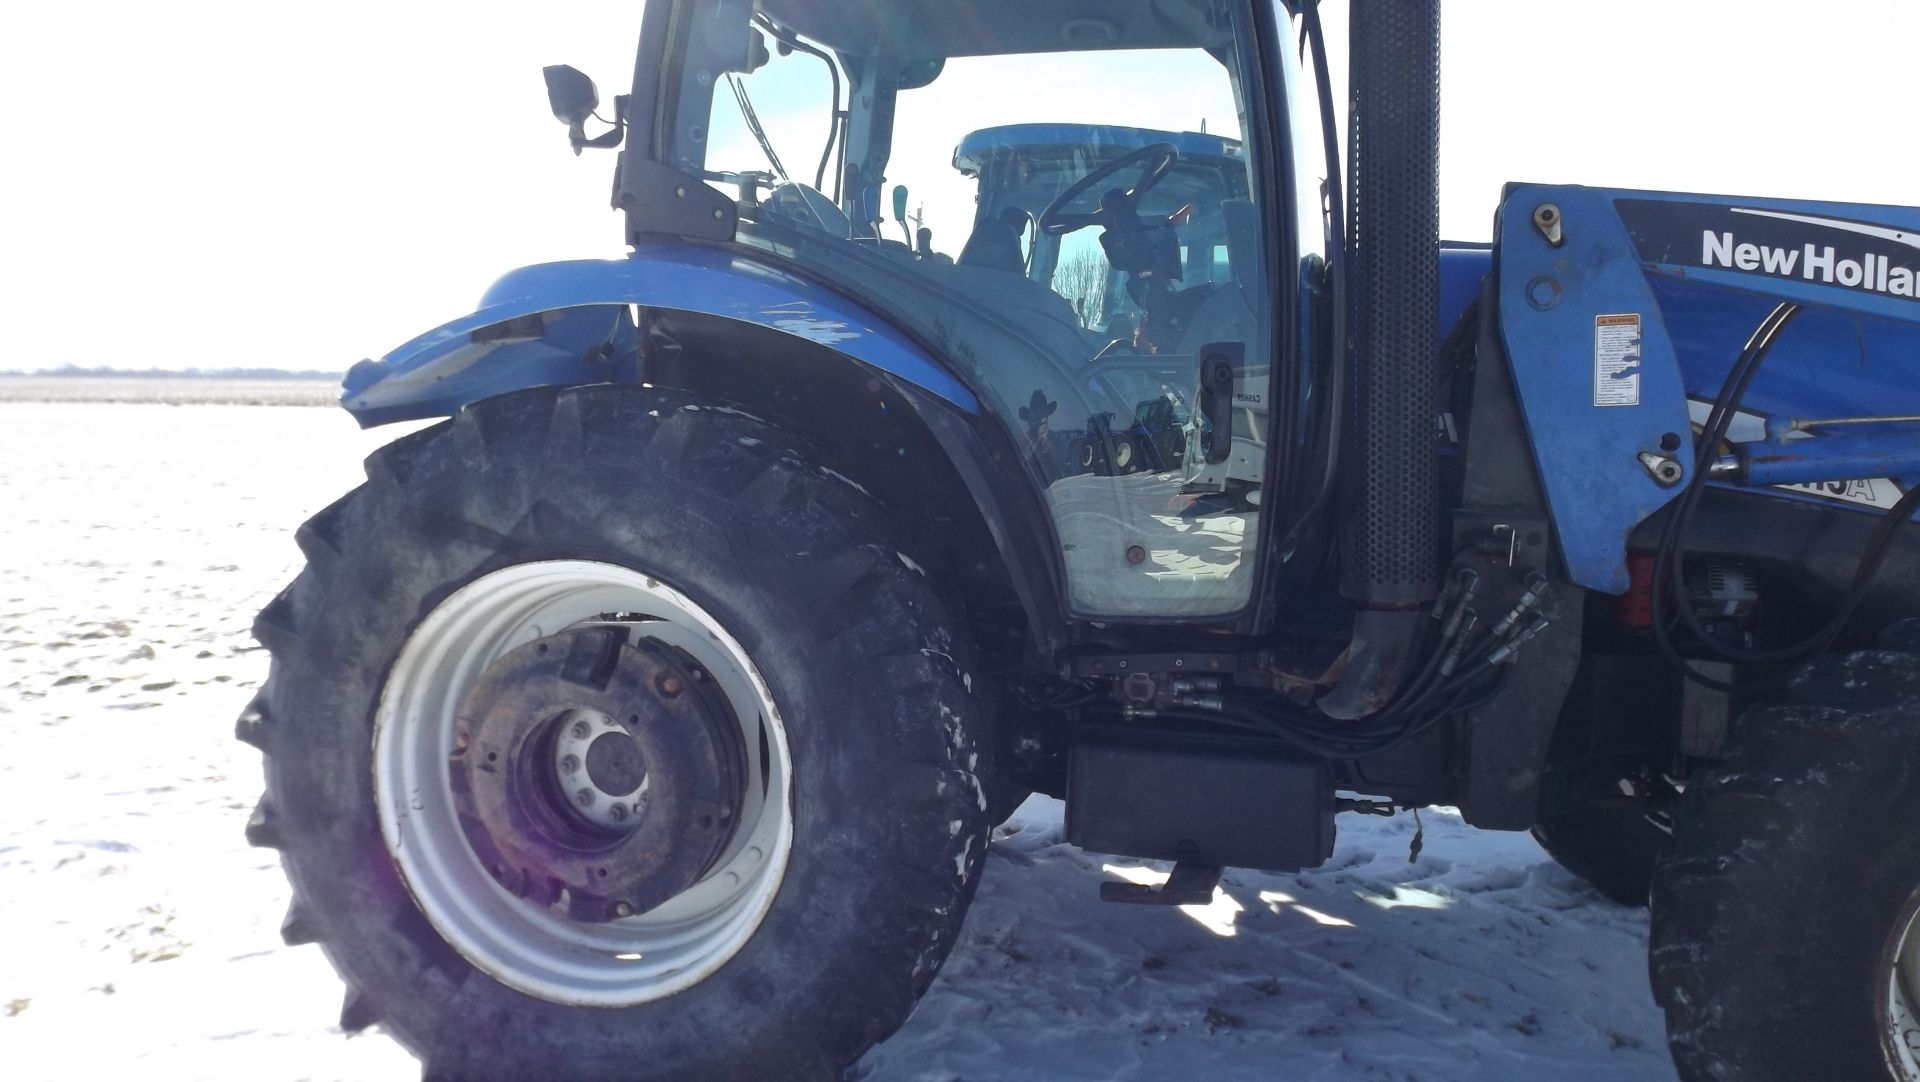 New Holland TS115A Tractor '06, sn#ACP258691 8055 Hrs, MFWD, Cab, 115 HP, 12/2, 3 Pt, 1000 Pto, 3 - Image 5 of 13